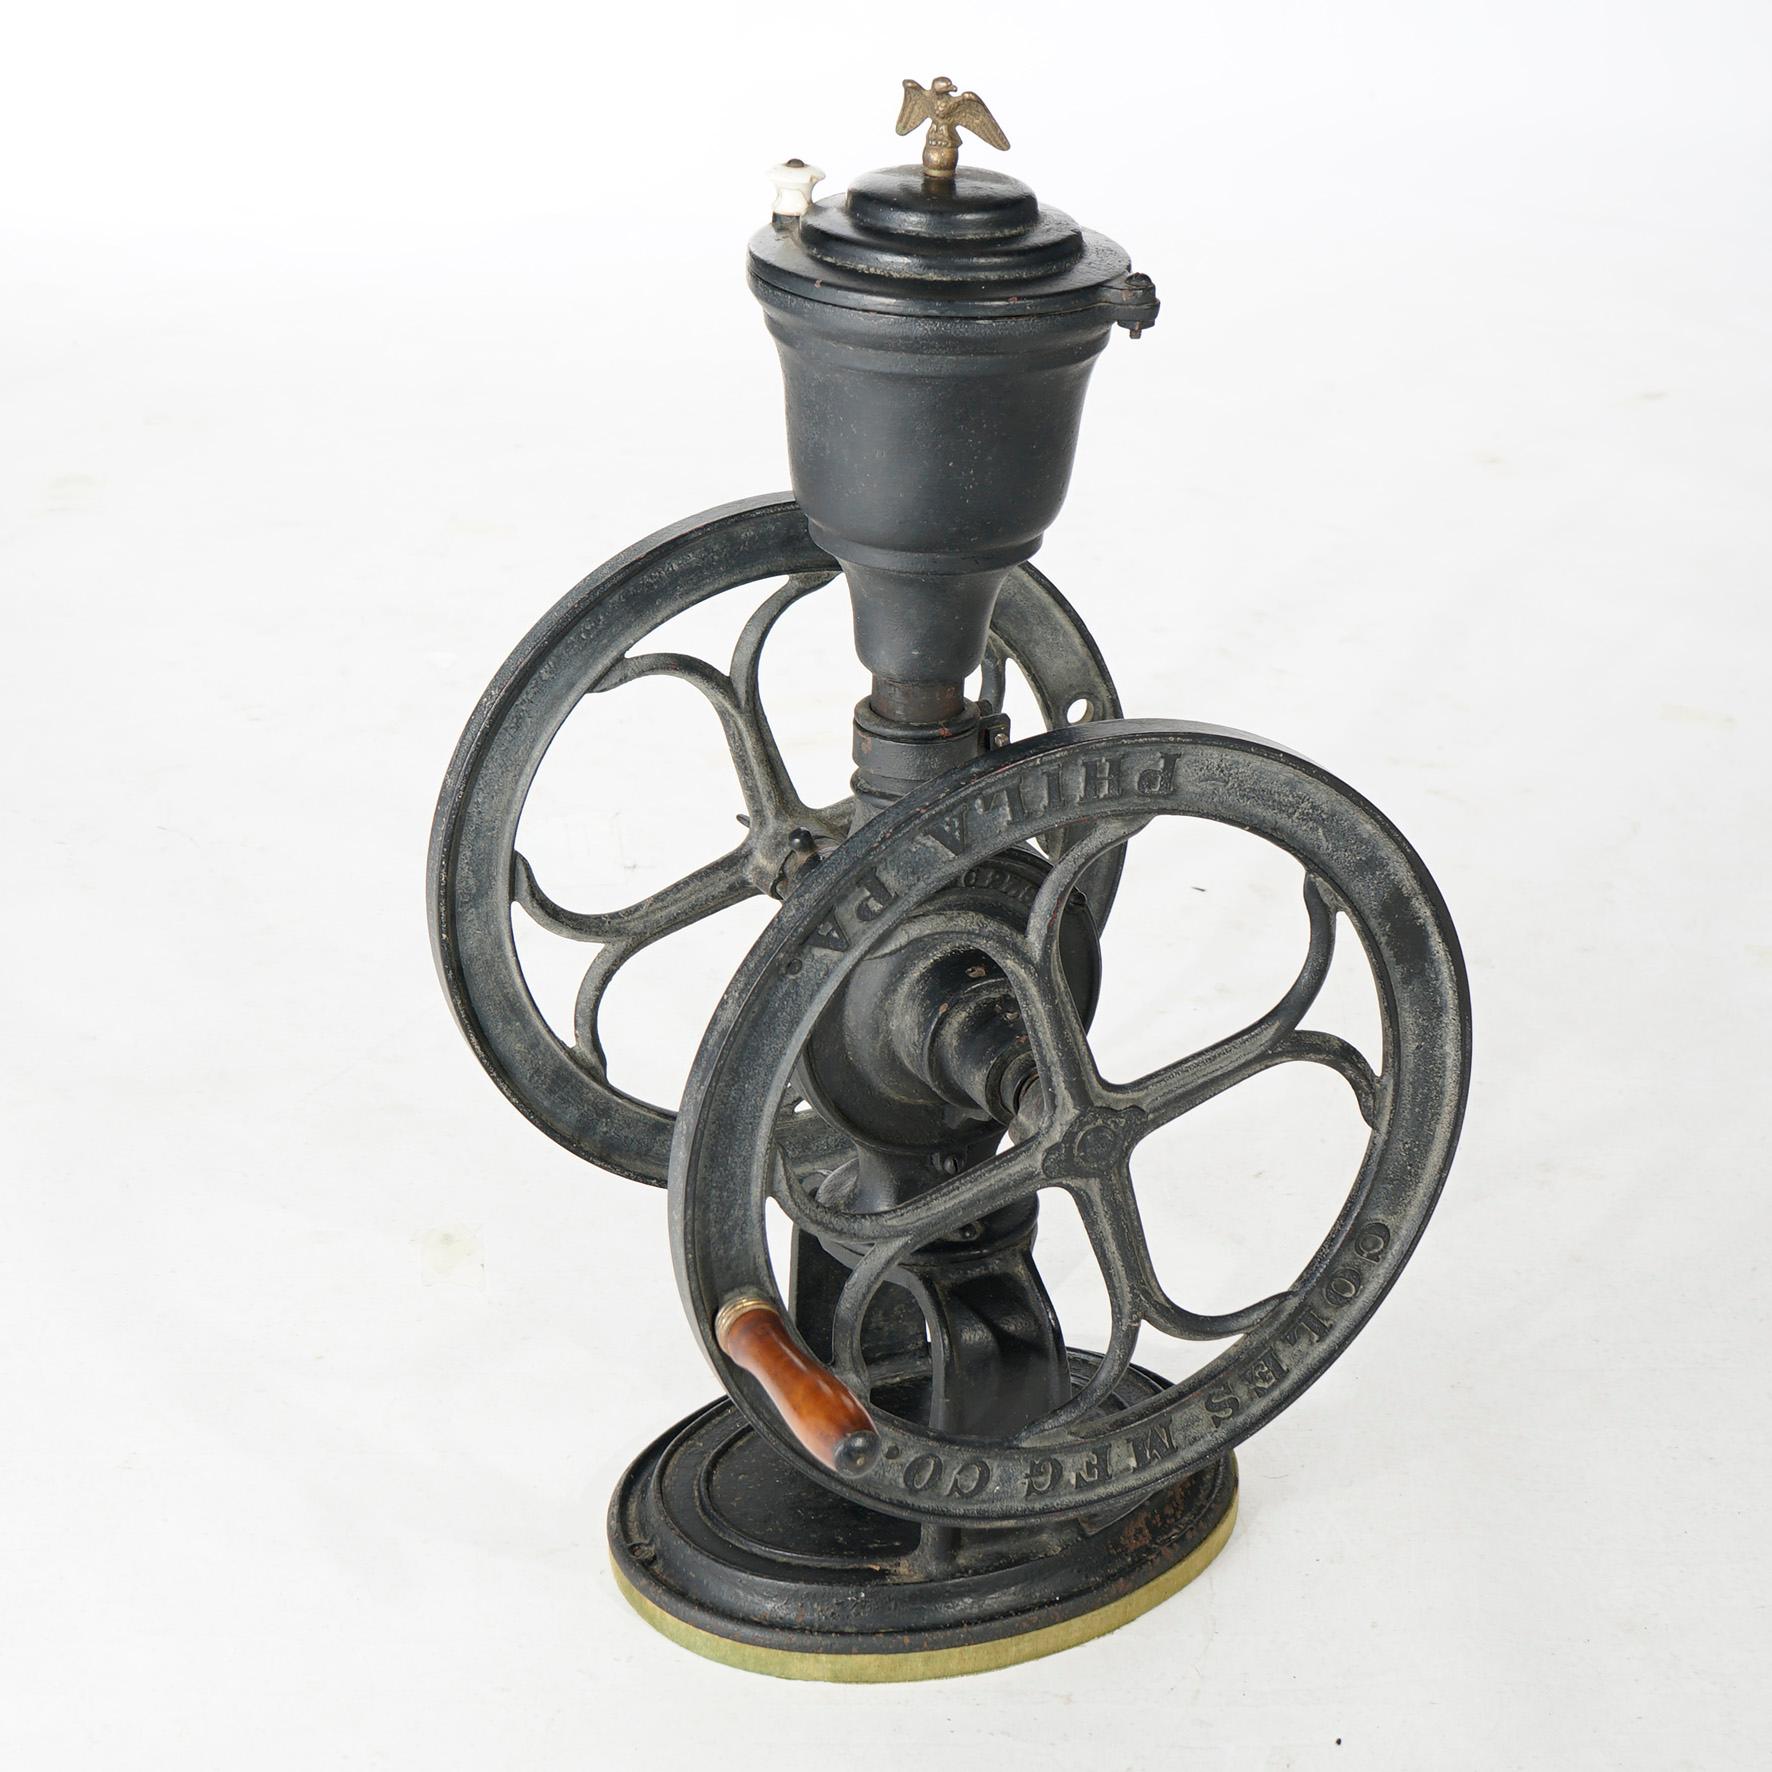 An antique country store countertop coffee grinder by Coles Mfg. Co., Phila, PA offers cast iron construction with eagle finial and maker embossed on grinder wheel as photographed, c1900

Measures- 31''H x 21''W x 15.5''D.

Catalogue Note: Ask about